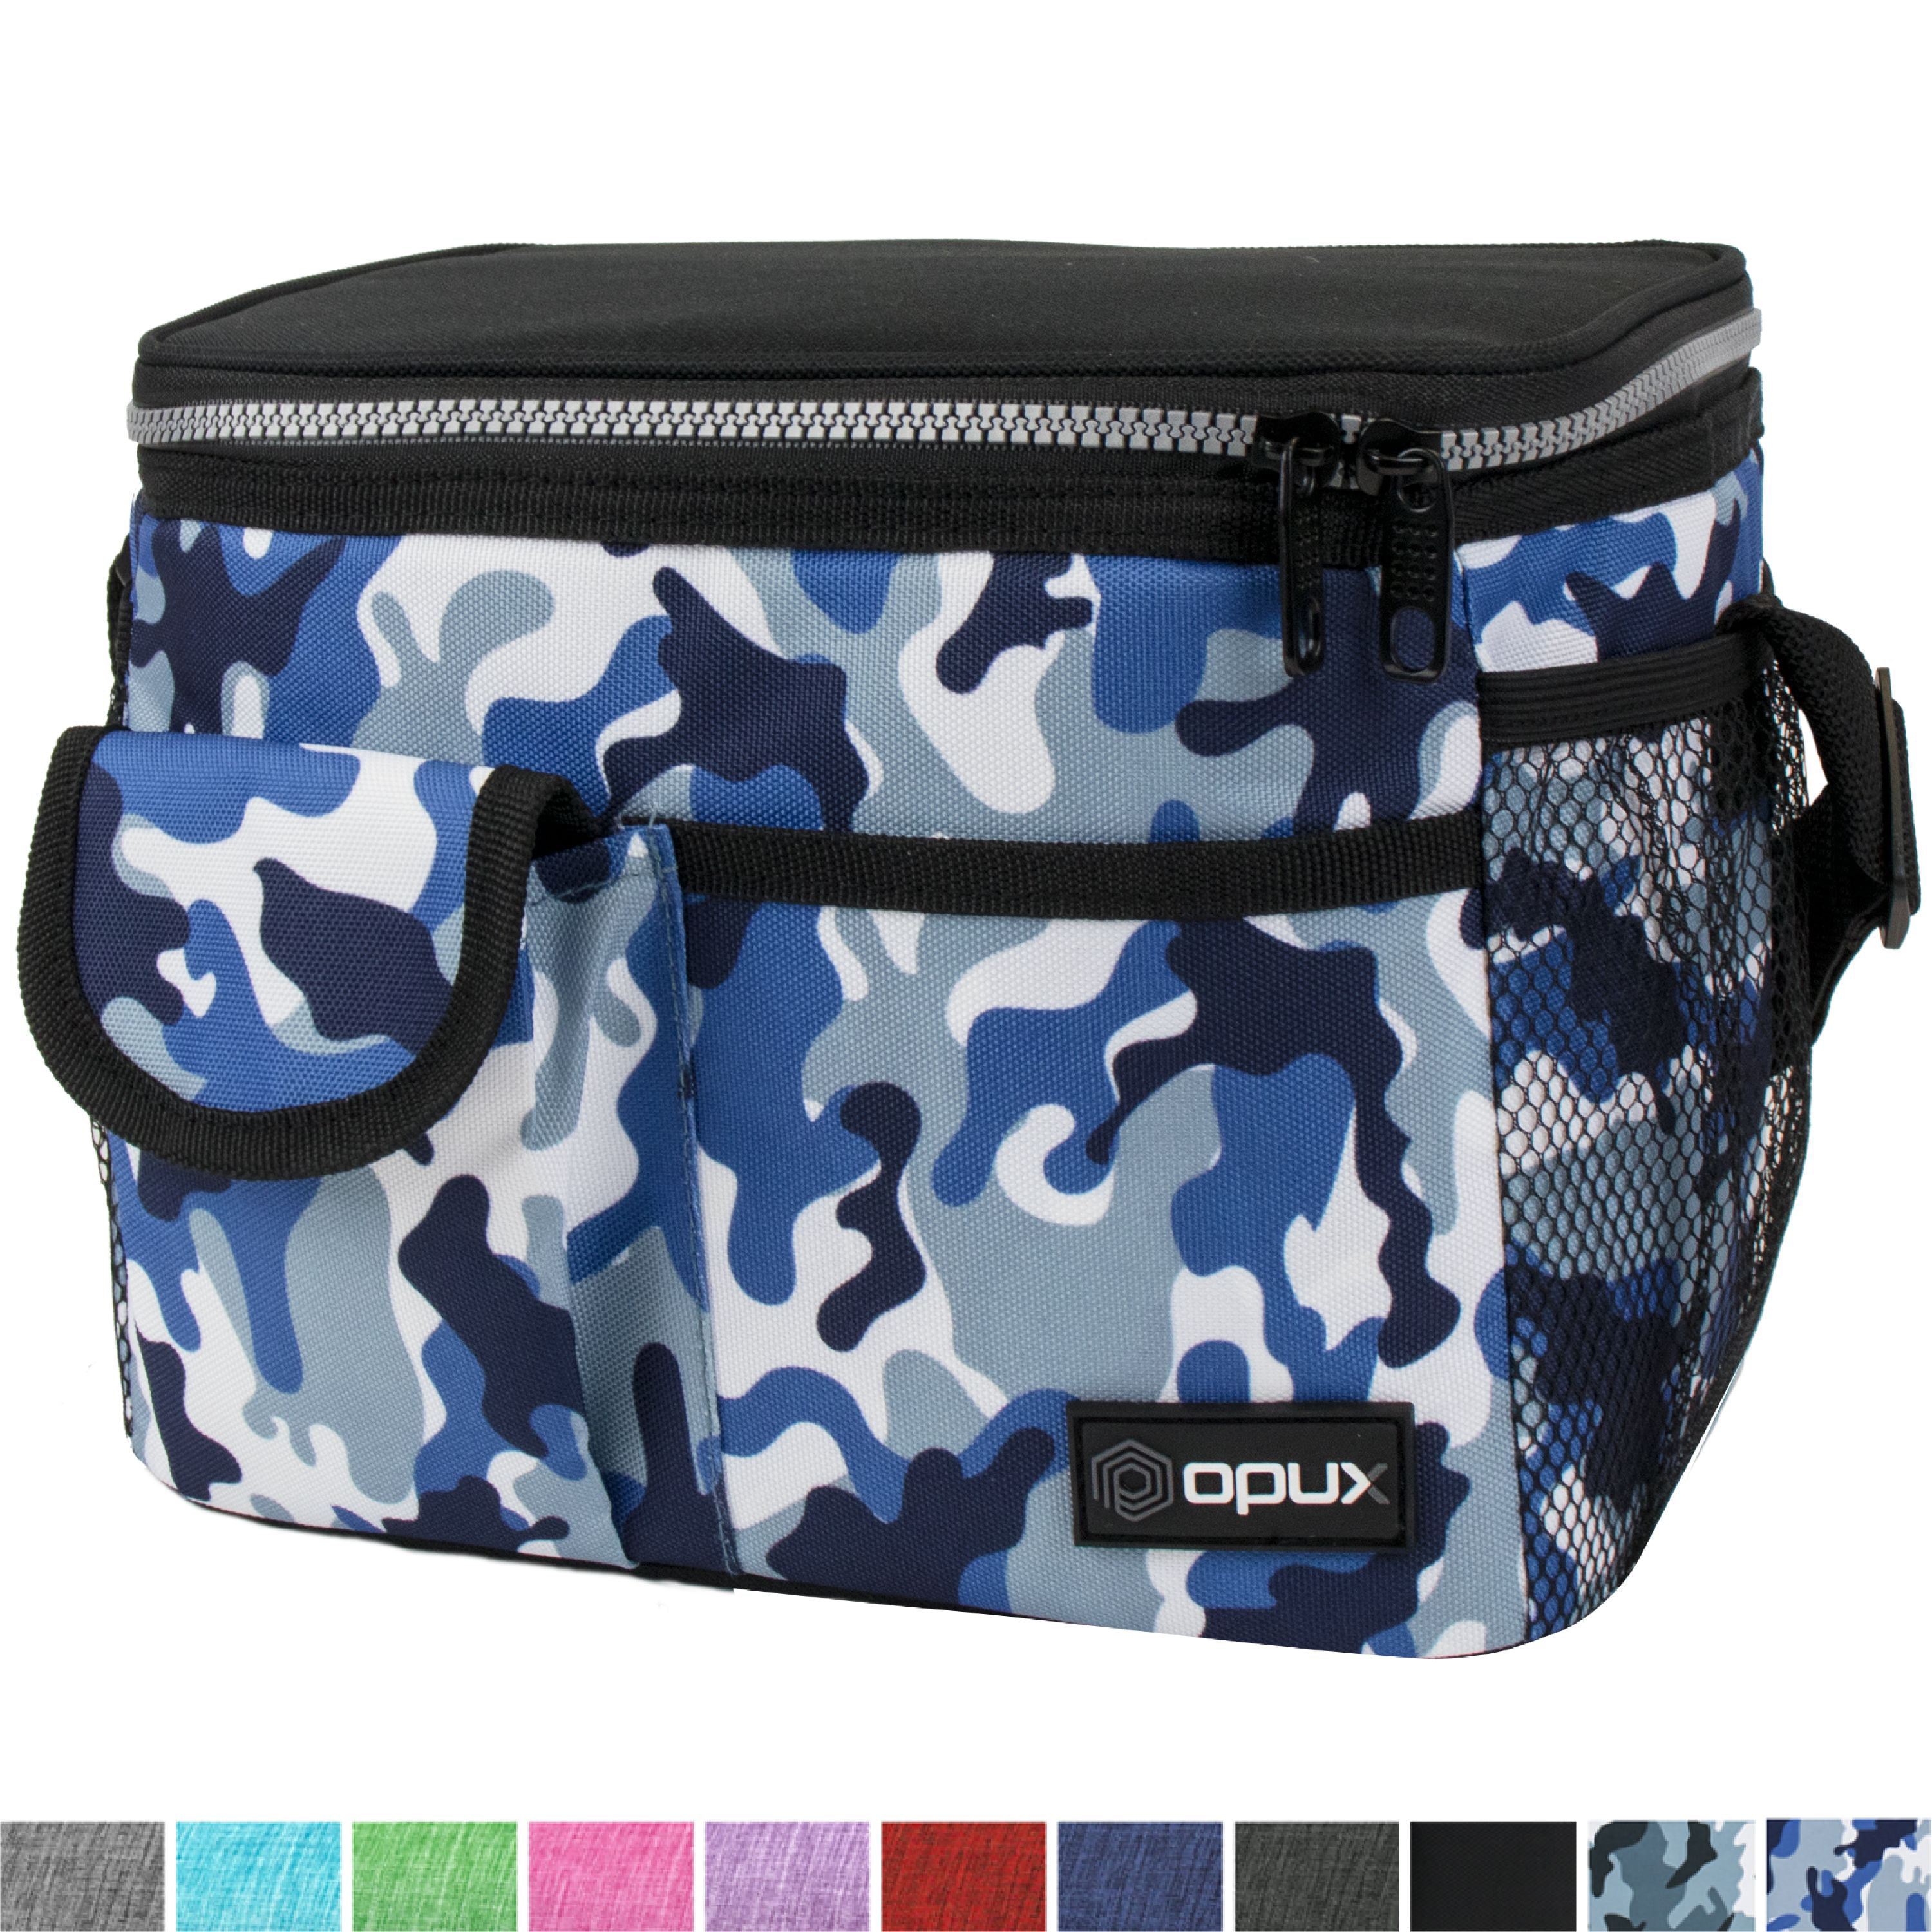 OPUX Lunch Bag Insulated Lunch Box for Women, Men, Kids | Medium Leakproof Lunch Tote Bag for ...